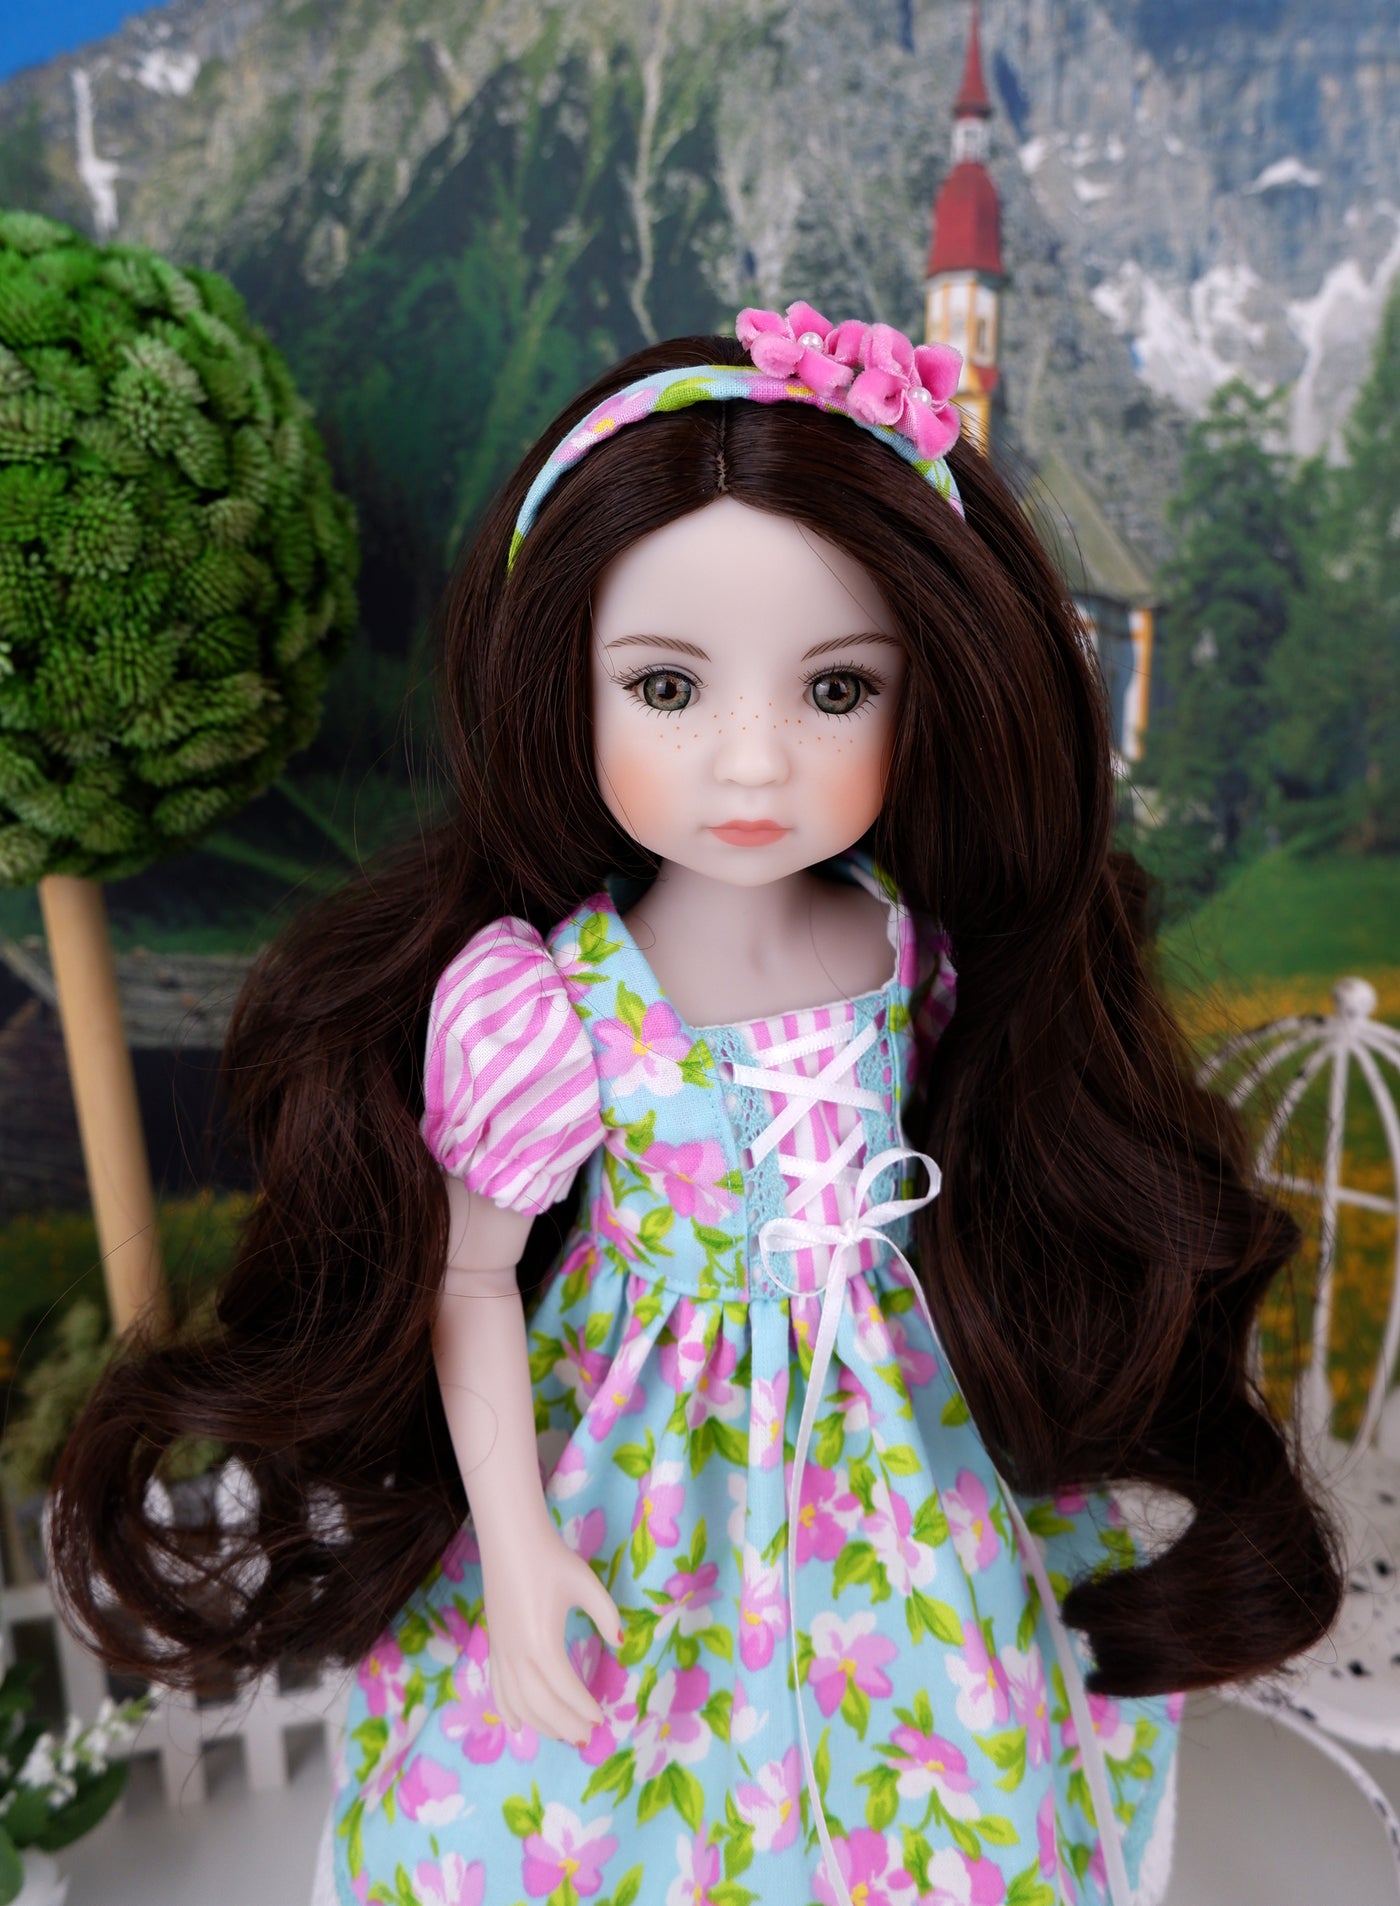 Tyrol Geranium - dress ensemble with shoes for Ruby Red Fashion Friends doll